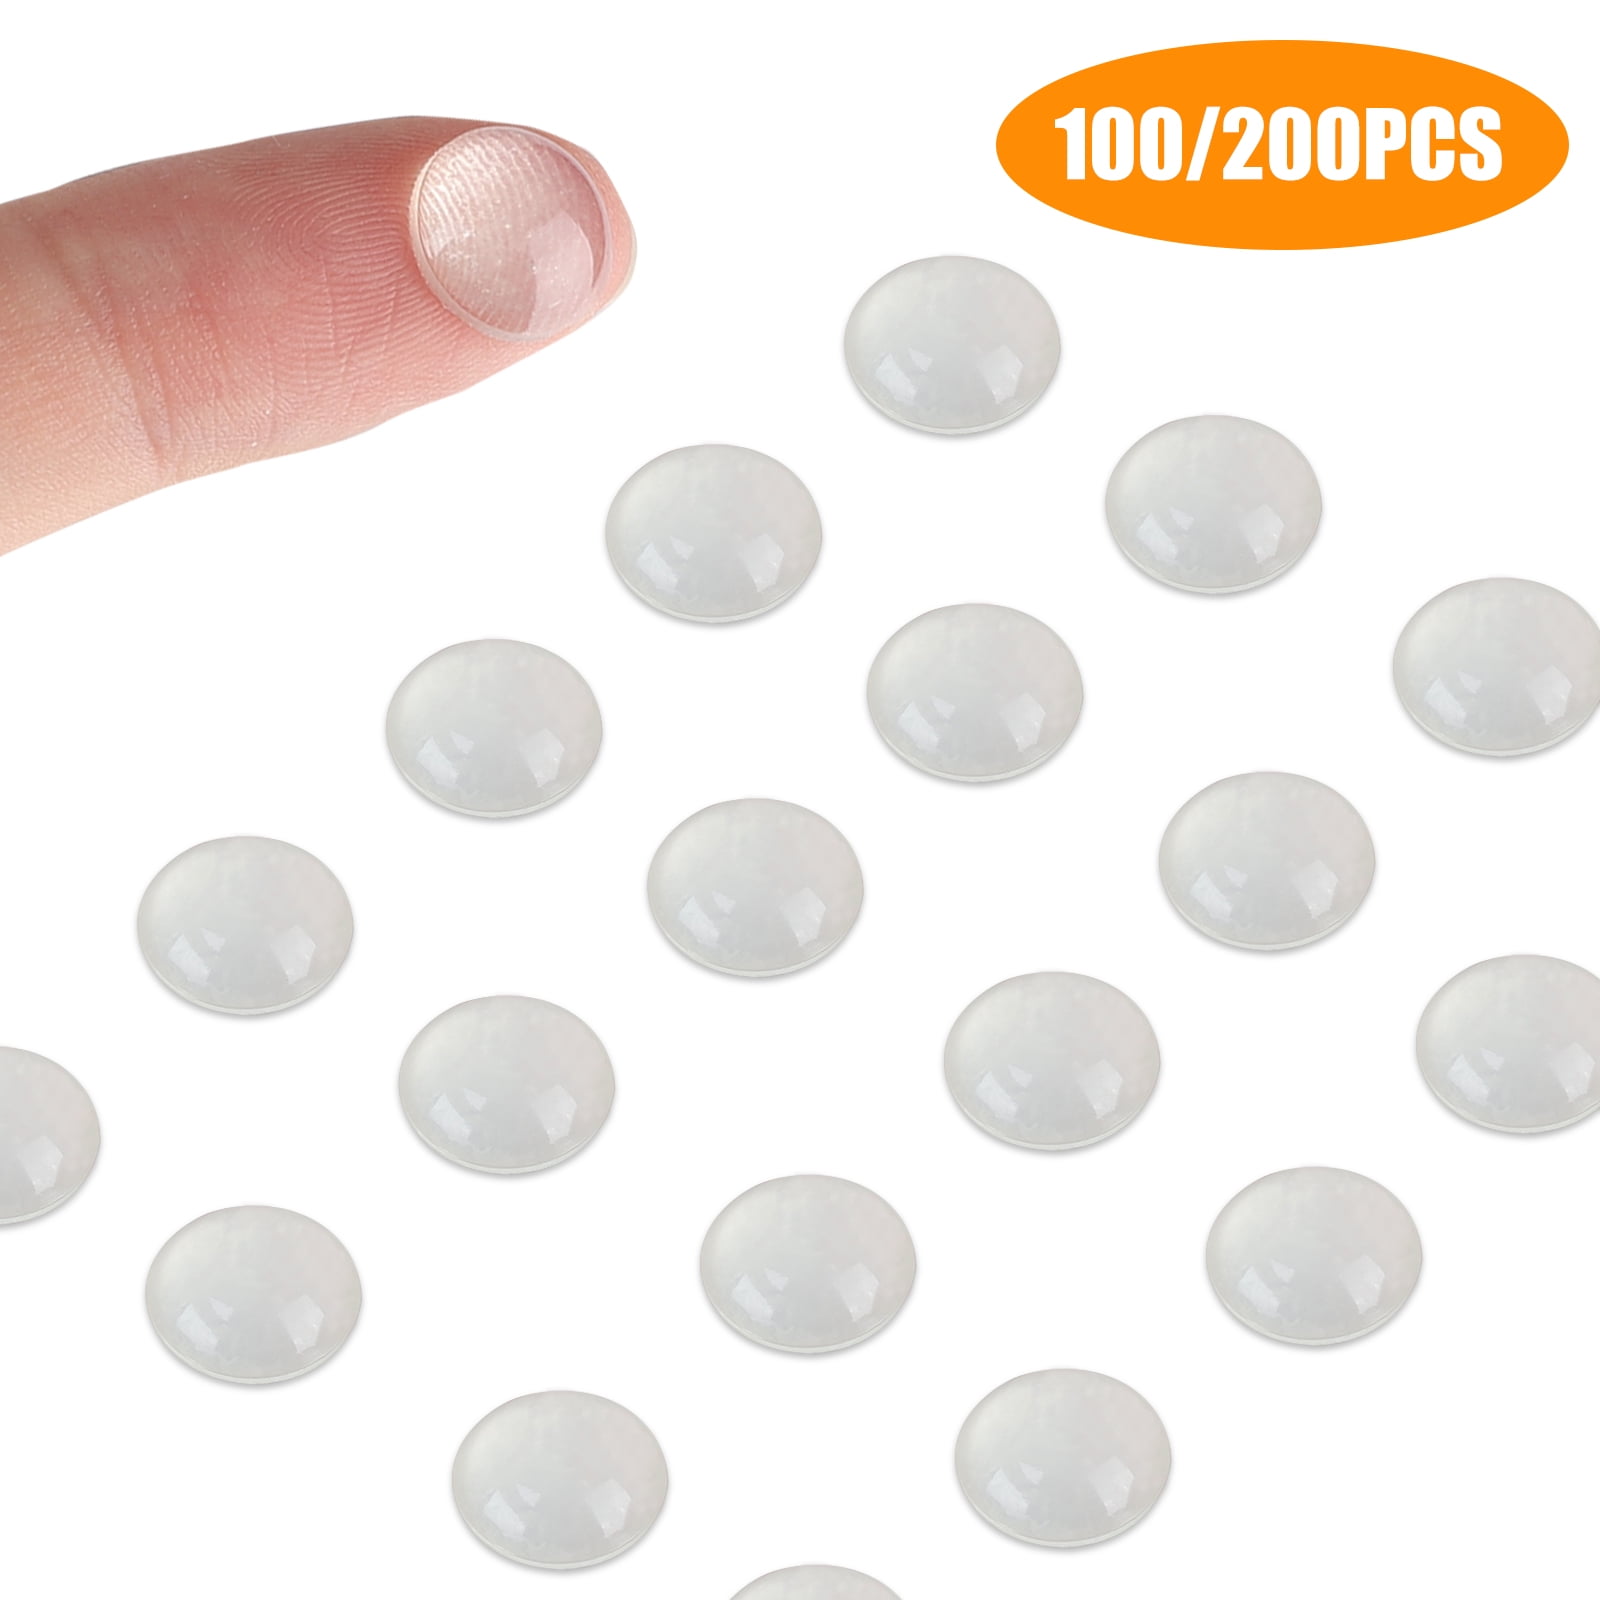 200pc 1/2" Diameter Clear Self-Adhesive Rubber Bumper Pad Wood Glass Surface 